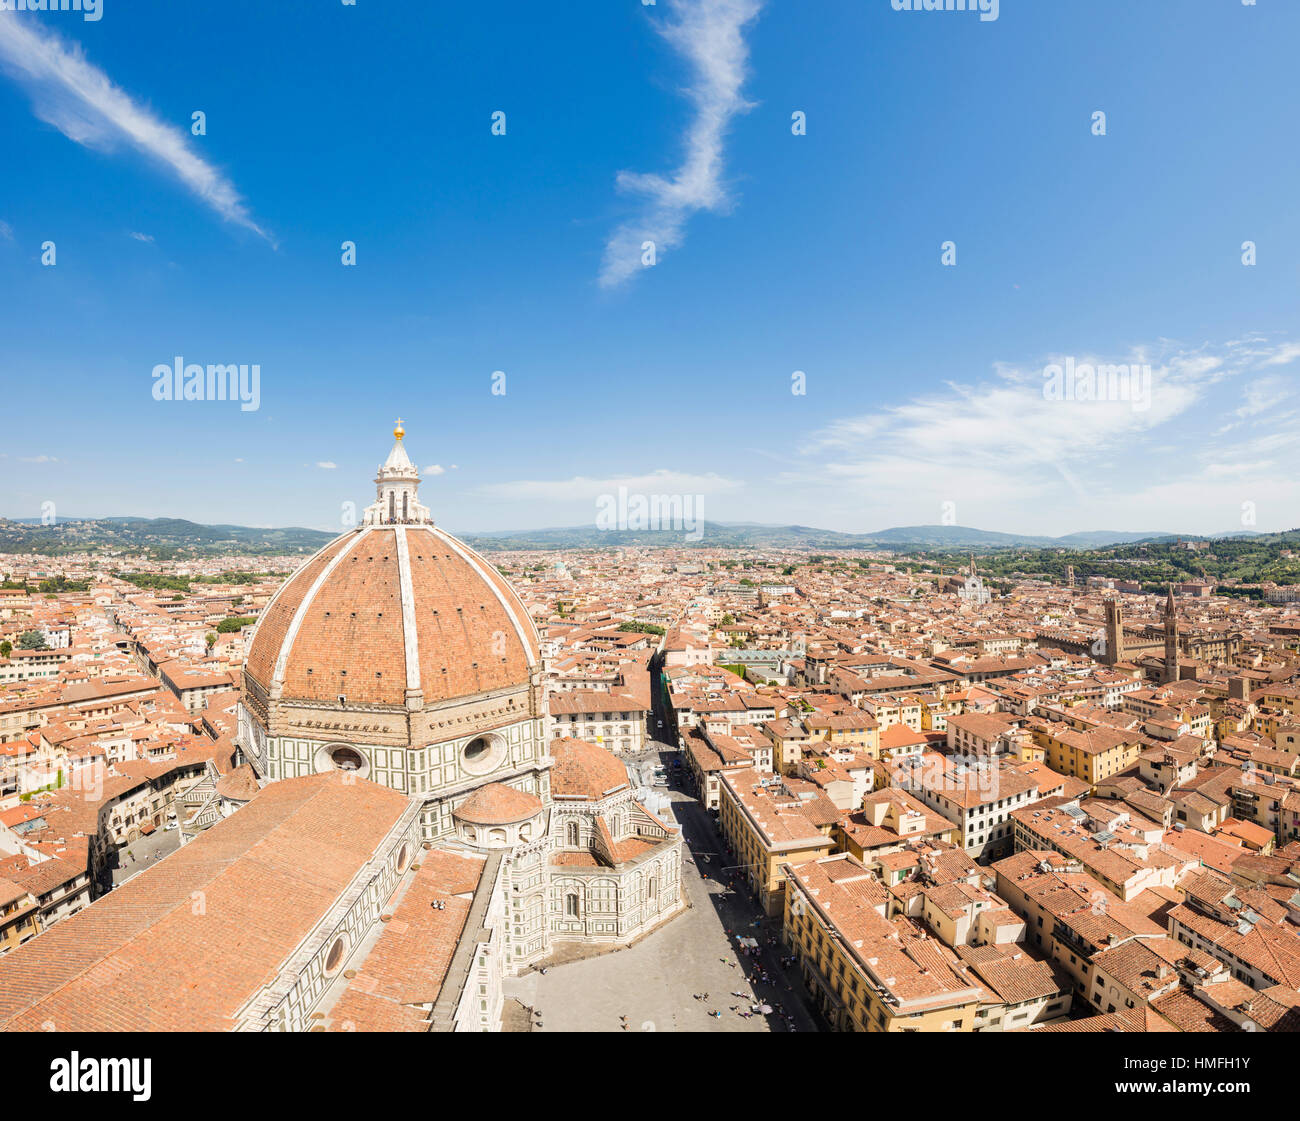 View of the old town of Florence with the Duomo di Firenze and Brunelleschi's Dome in the foreground, Florence, Tuscany, Italy Stock Photo